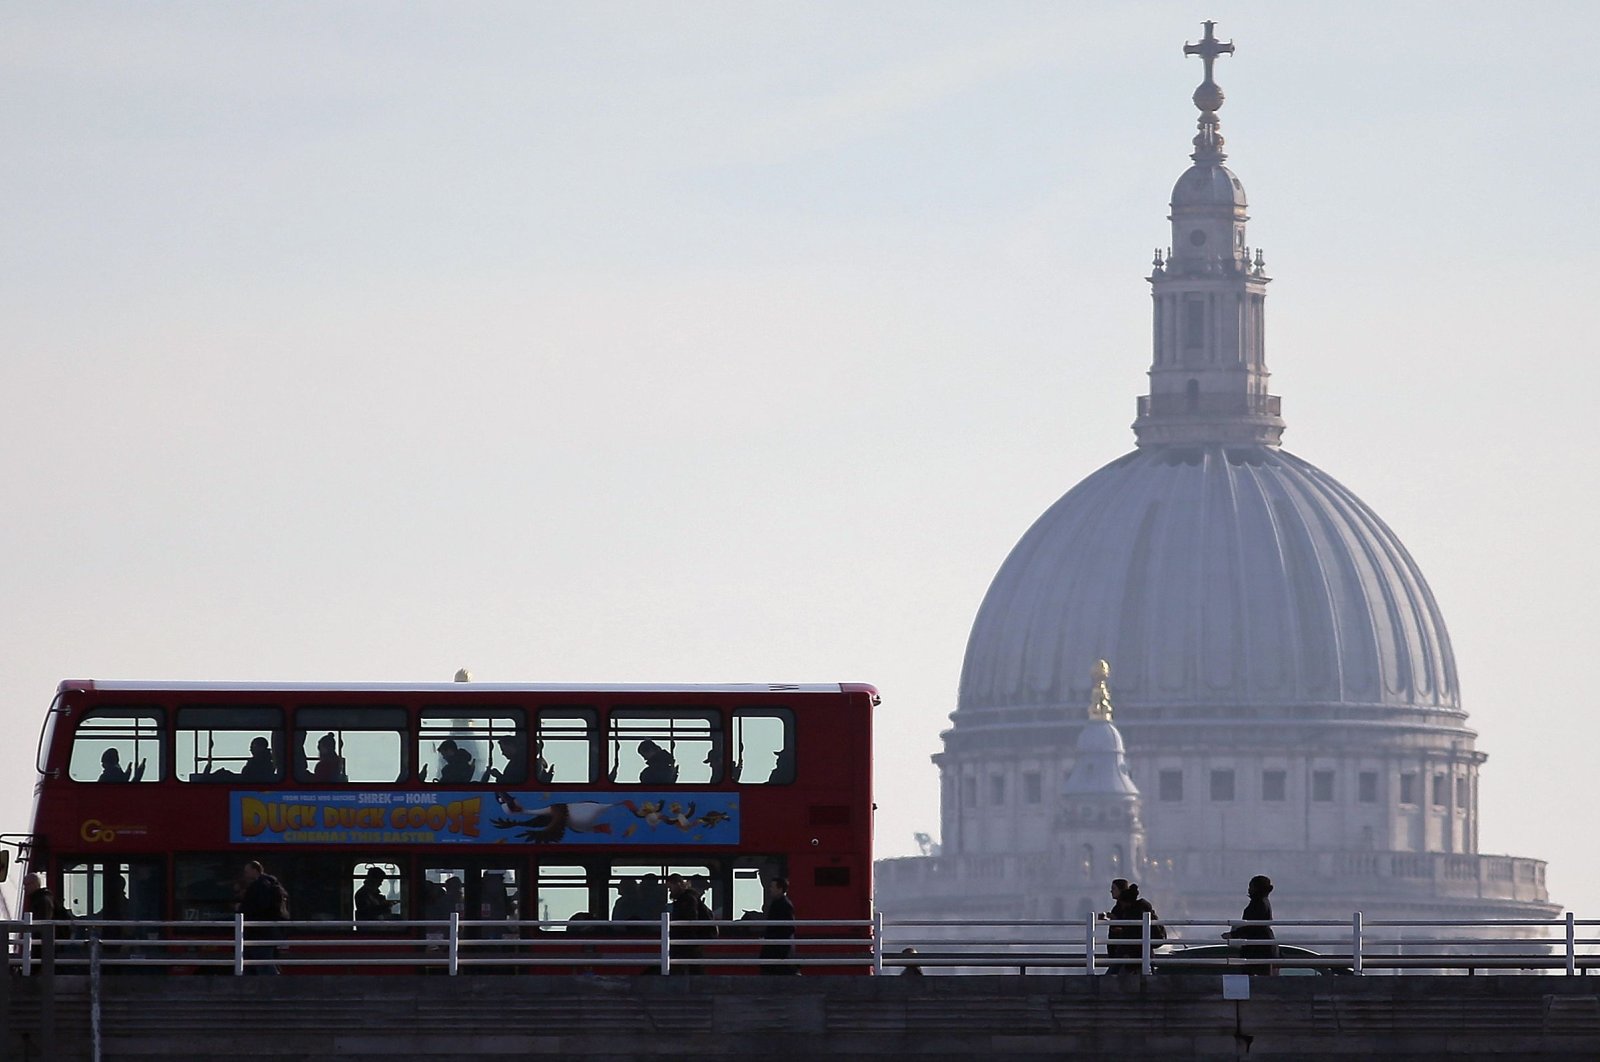 Commuters cross the Waterloo Bridge by bus and on foot, backdropped by the dome of St. Paul's Cathedral, London, March 21, 2018. (AFP Photo)